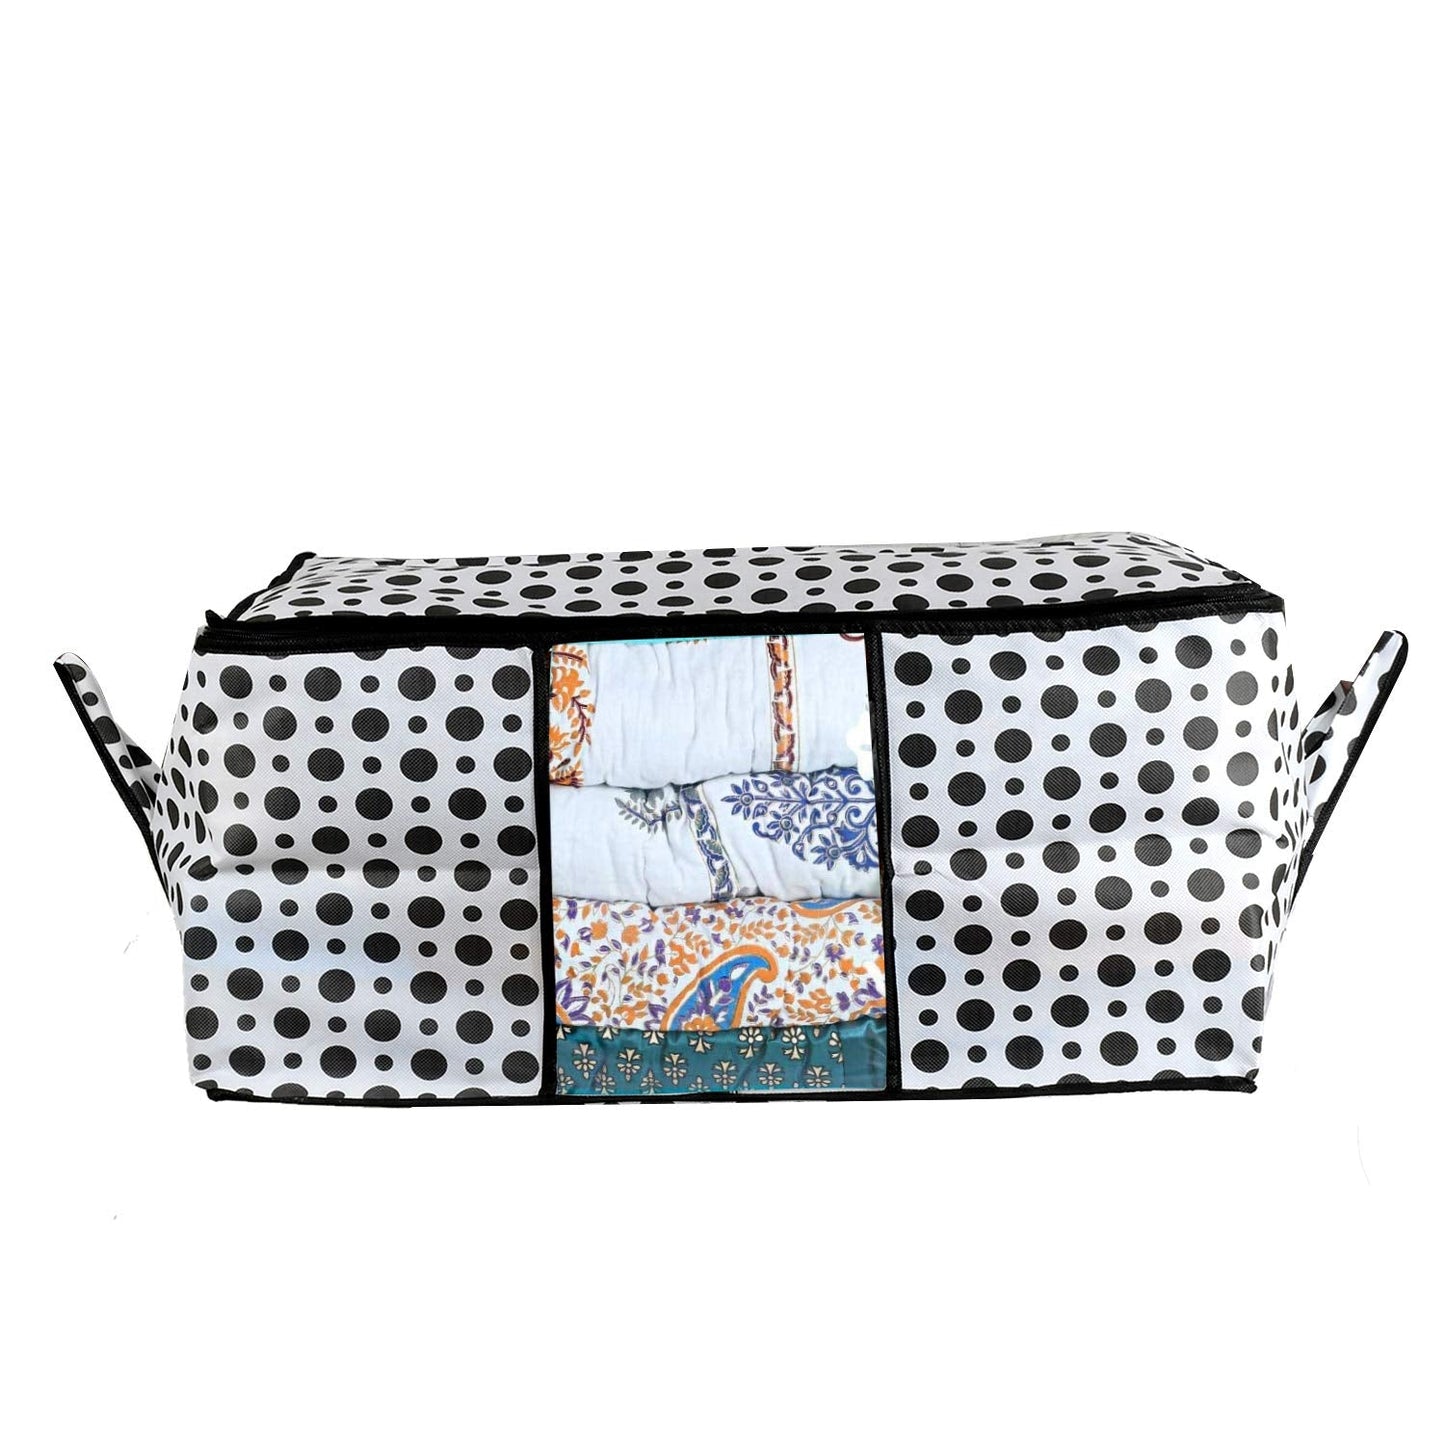 Kuber Industries Polka Dots Design Non Woven Underbed Storage Bag Cloth Organiser Blanket Cover with Transparent Window Black  White -CTKTC38100